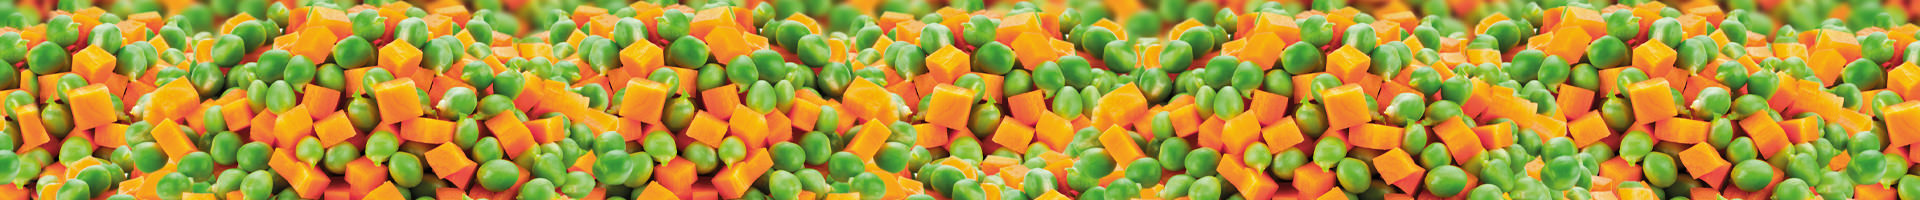 green peas and carrots